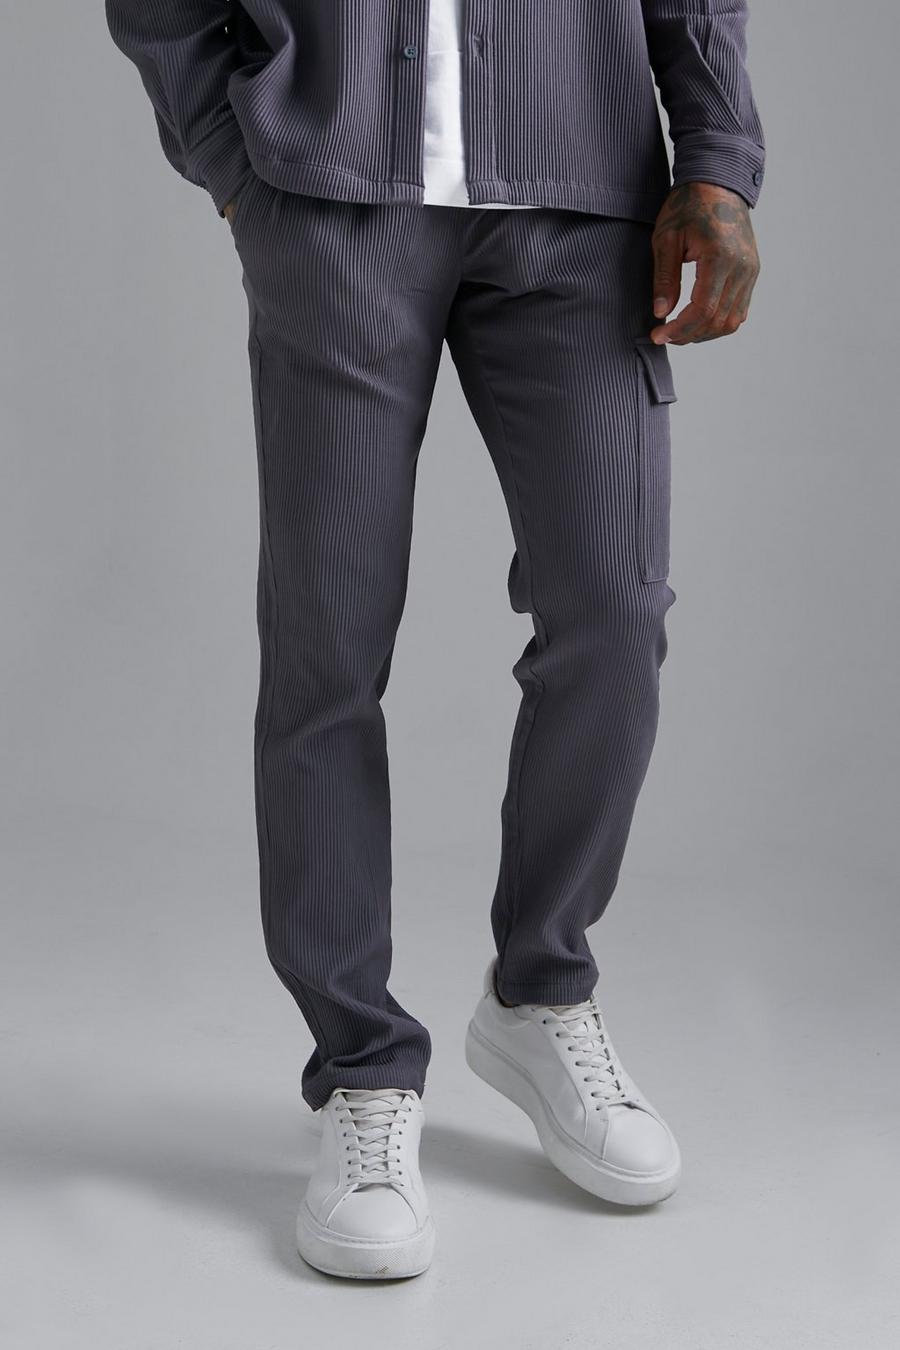 Pleated Suit Trousers - Grey Flannel, Men's Trousers